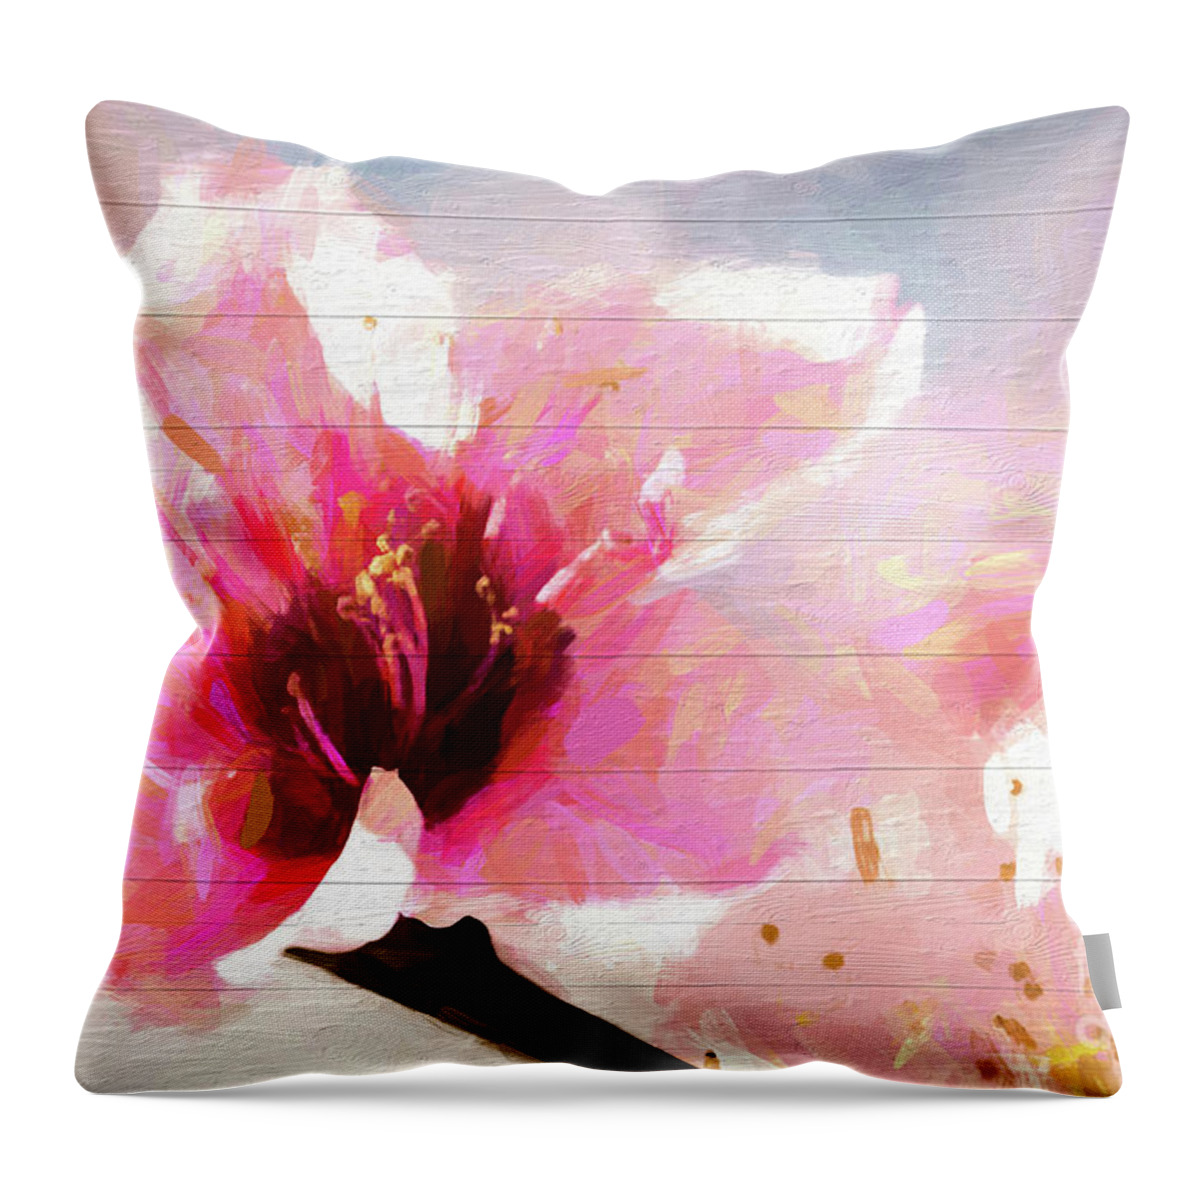 Sakura Throw Pillow featuring the photograph Cherry Blossom Wood Background by Andrea Anderegg